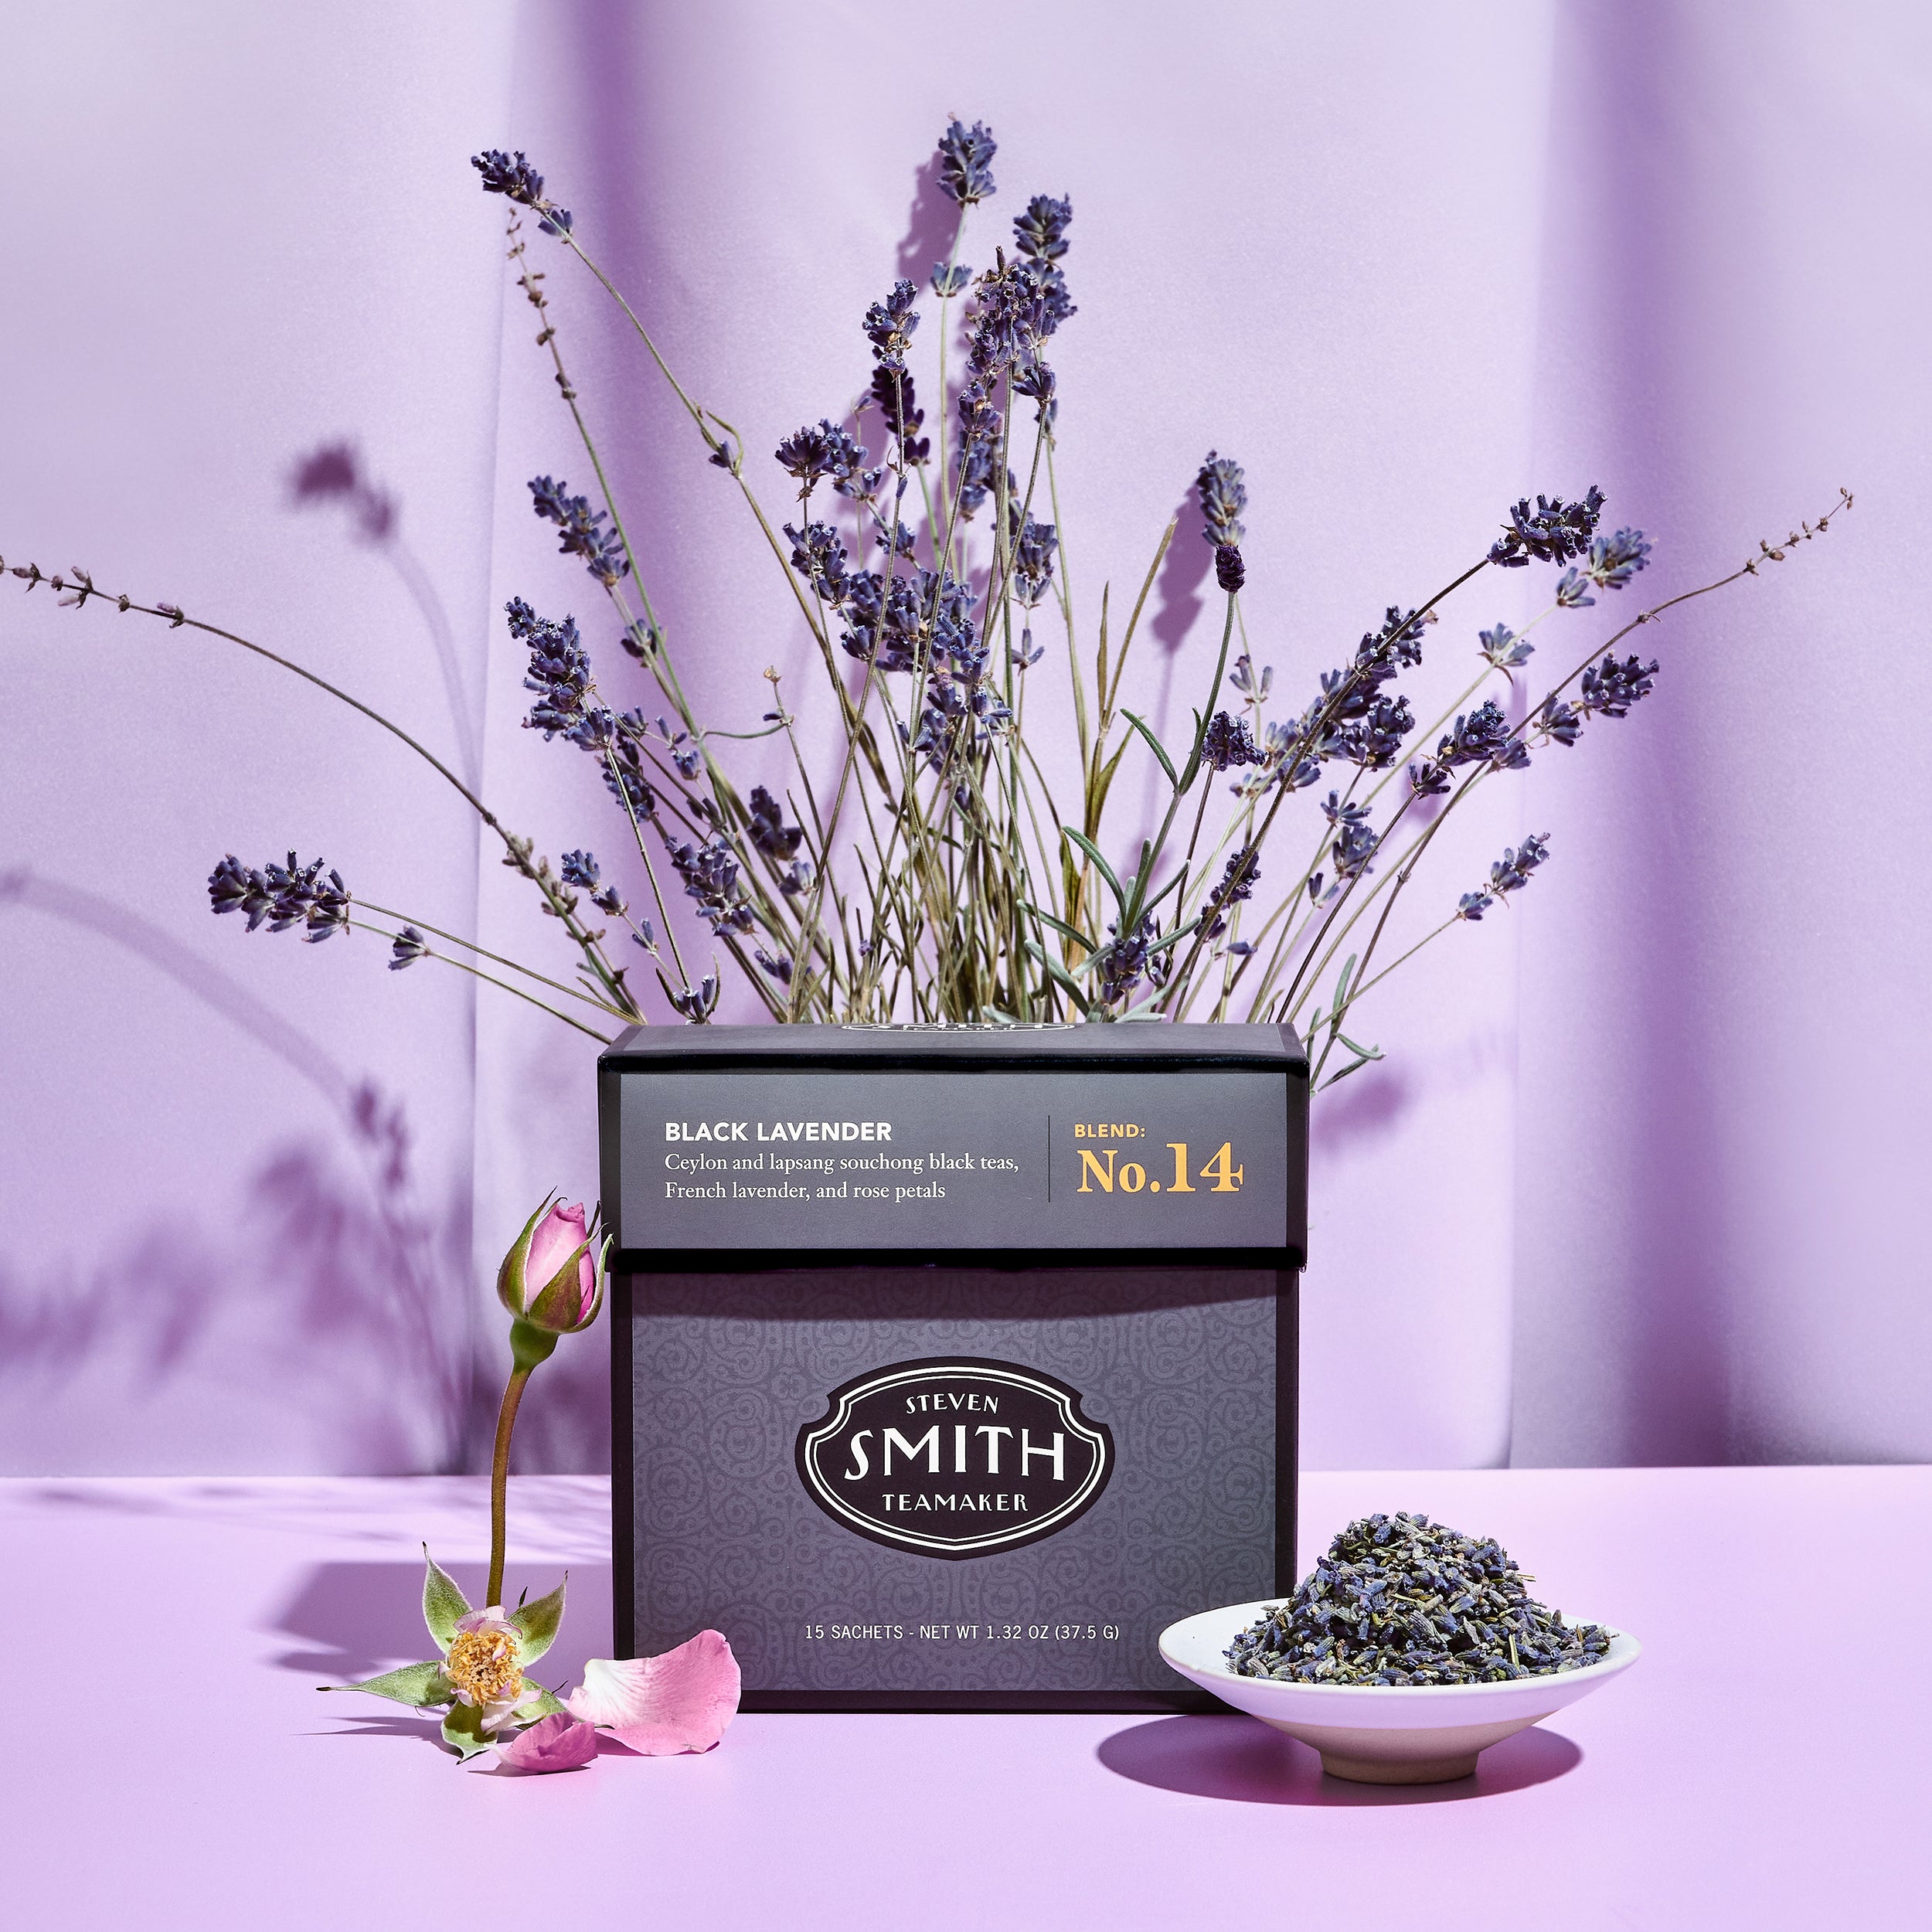 Black box of Black Lavender tea with purple background, rose petals and a pile of lavender.